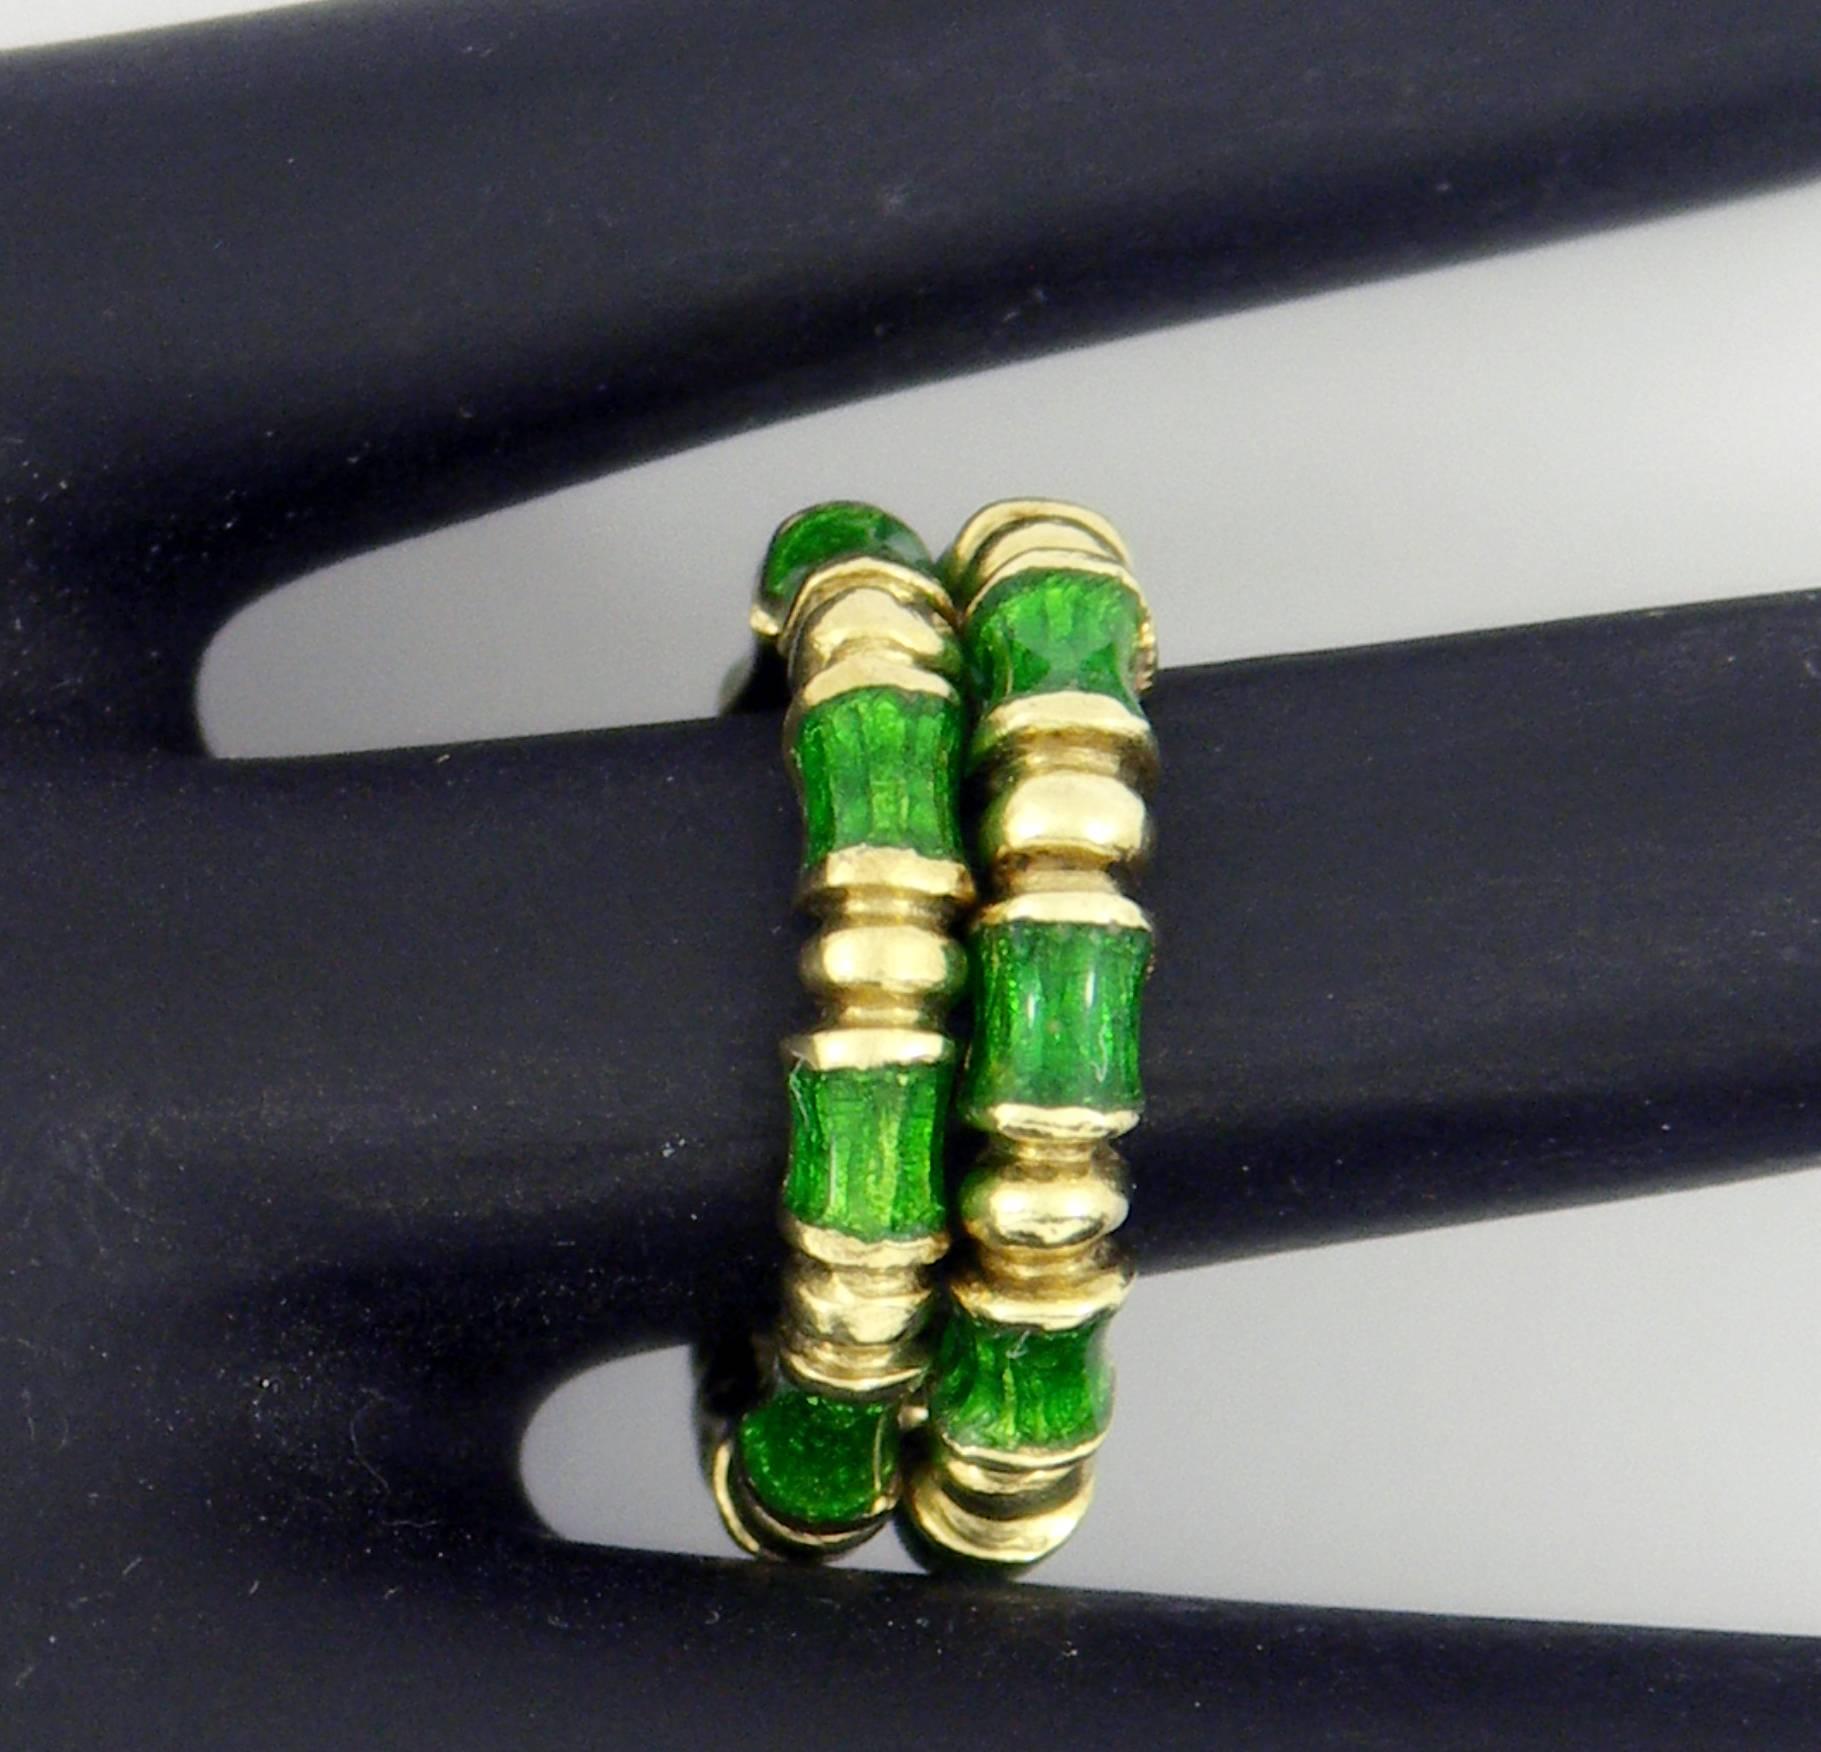 A pair of beautifully enameled band rings by Martine. Each of the rings measures 1/8 of an inch wide, featuring green enamel in between bamboo styled dividers. Size 5 1/4